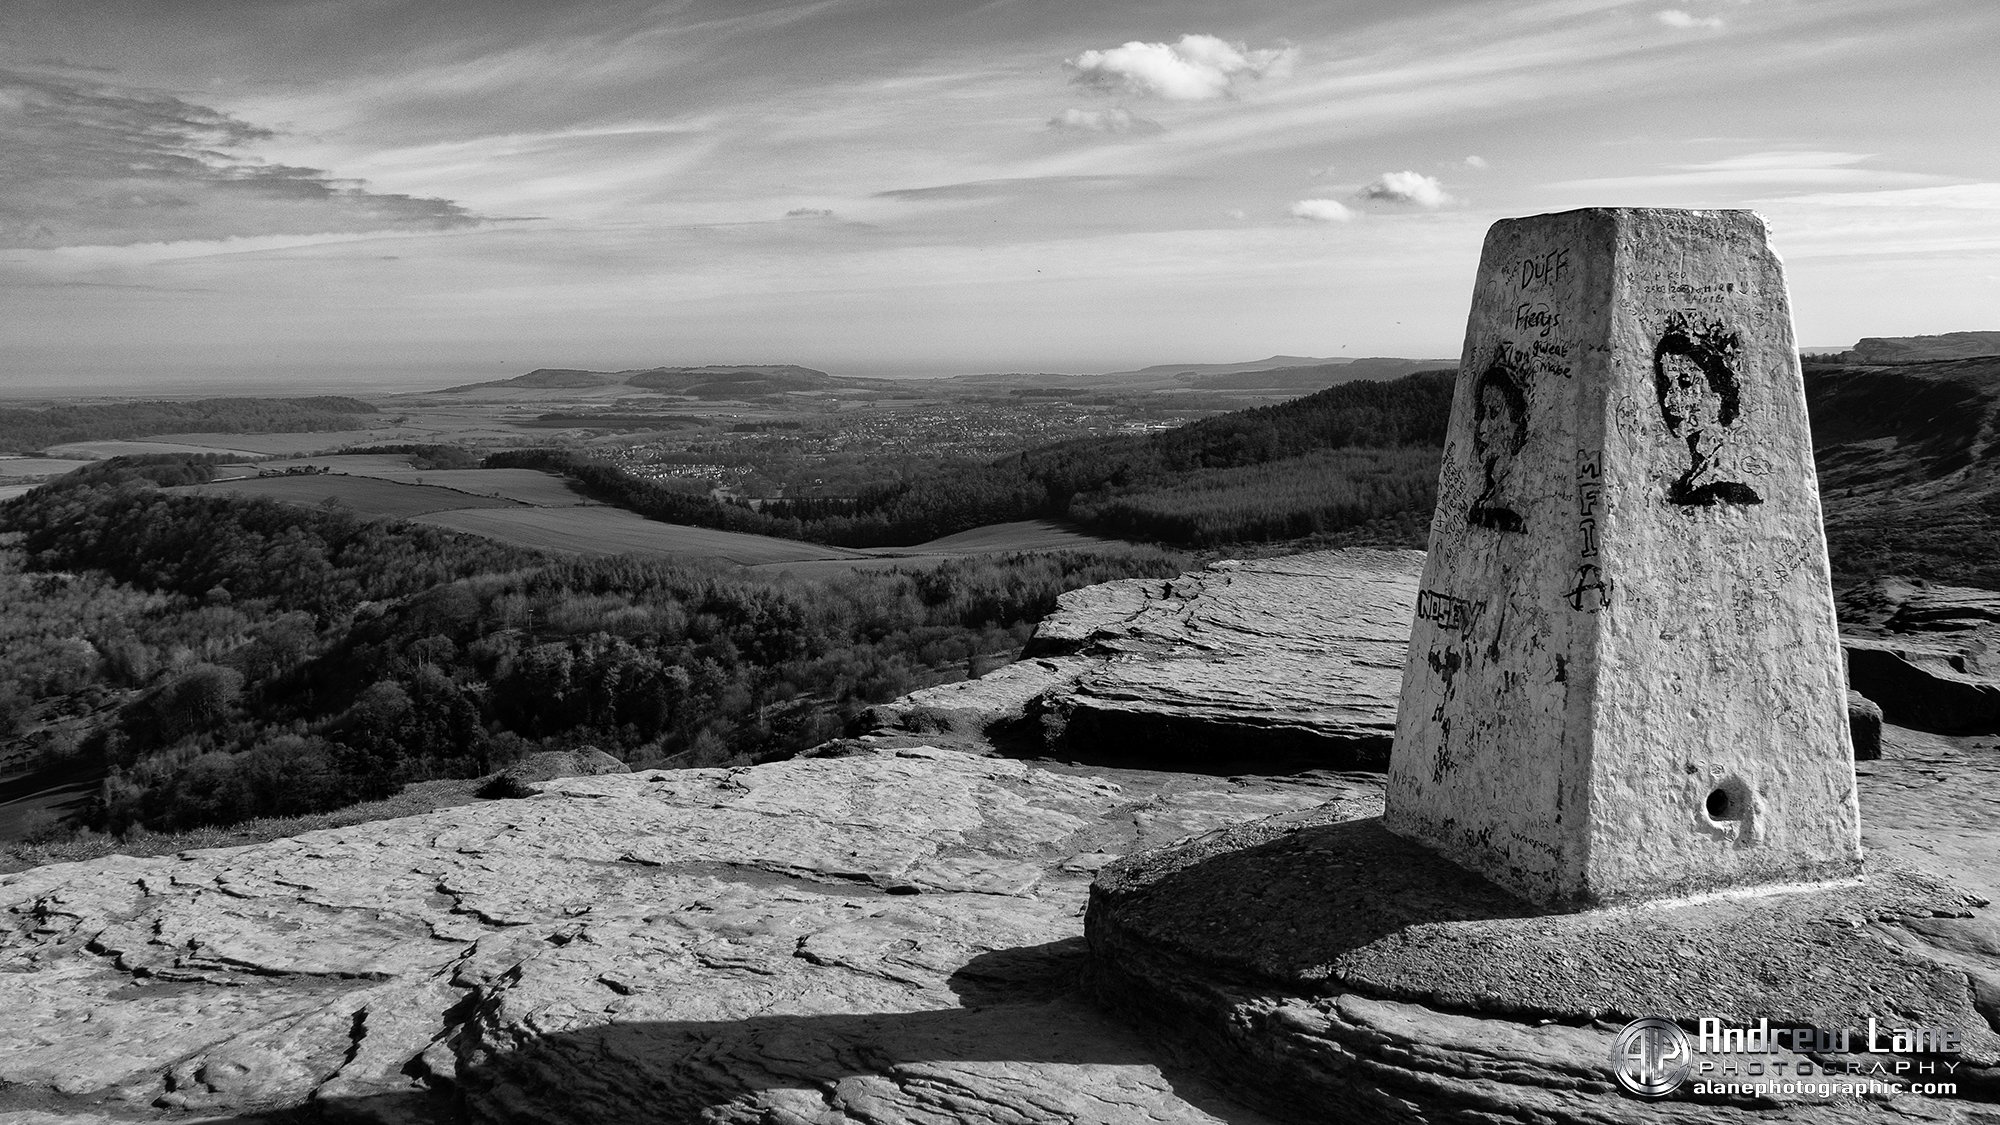  View towards the coast from Roseberry Topping 